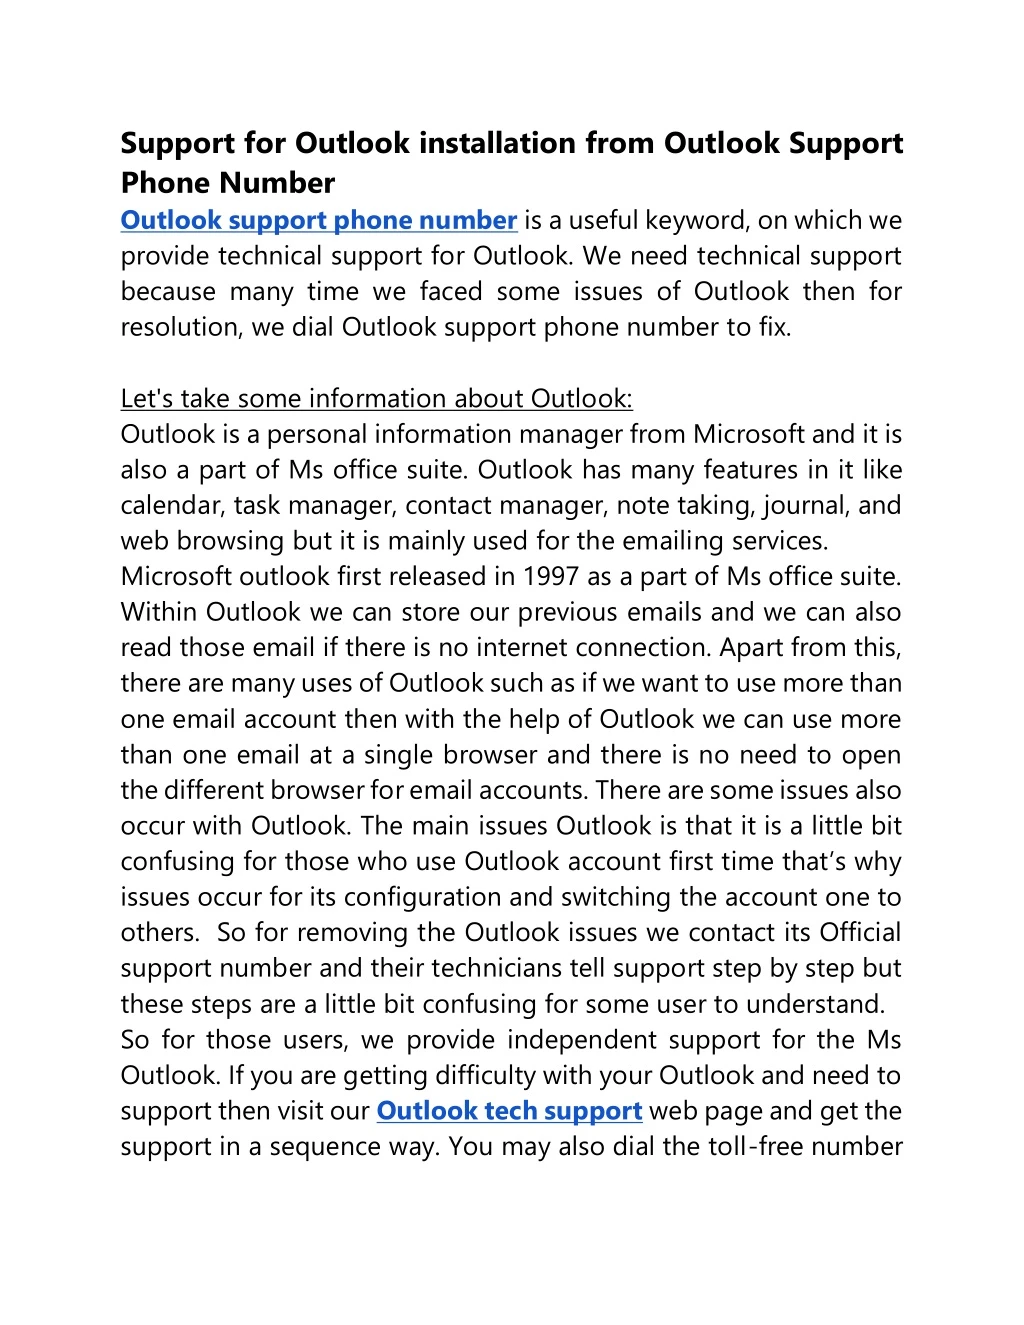 support for outlook installation from outlook